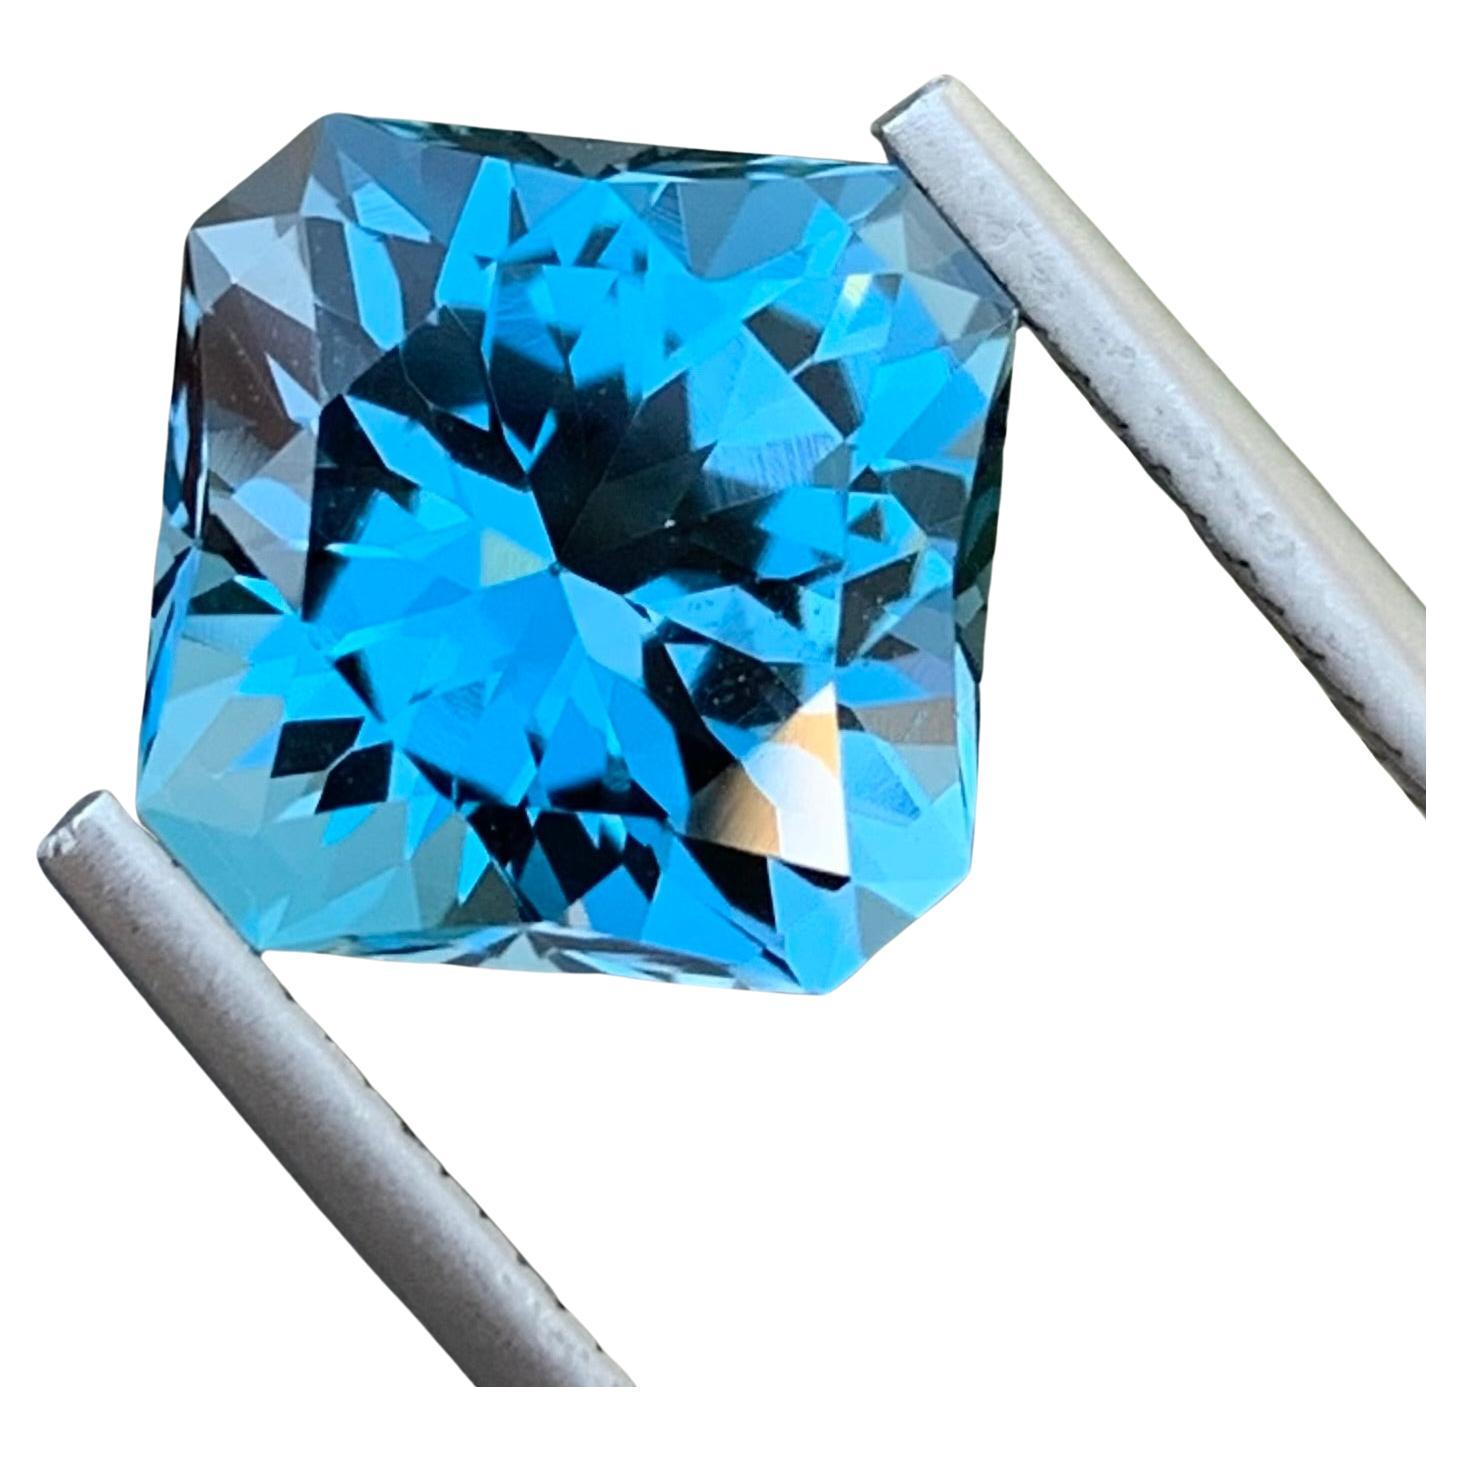 Perfect Square Shape 8.20 Carats Fancy Cut Loose London Blue Topaz Gem For Ring  For Sale